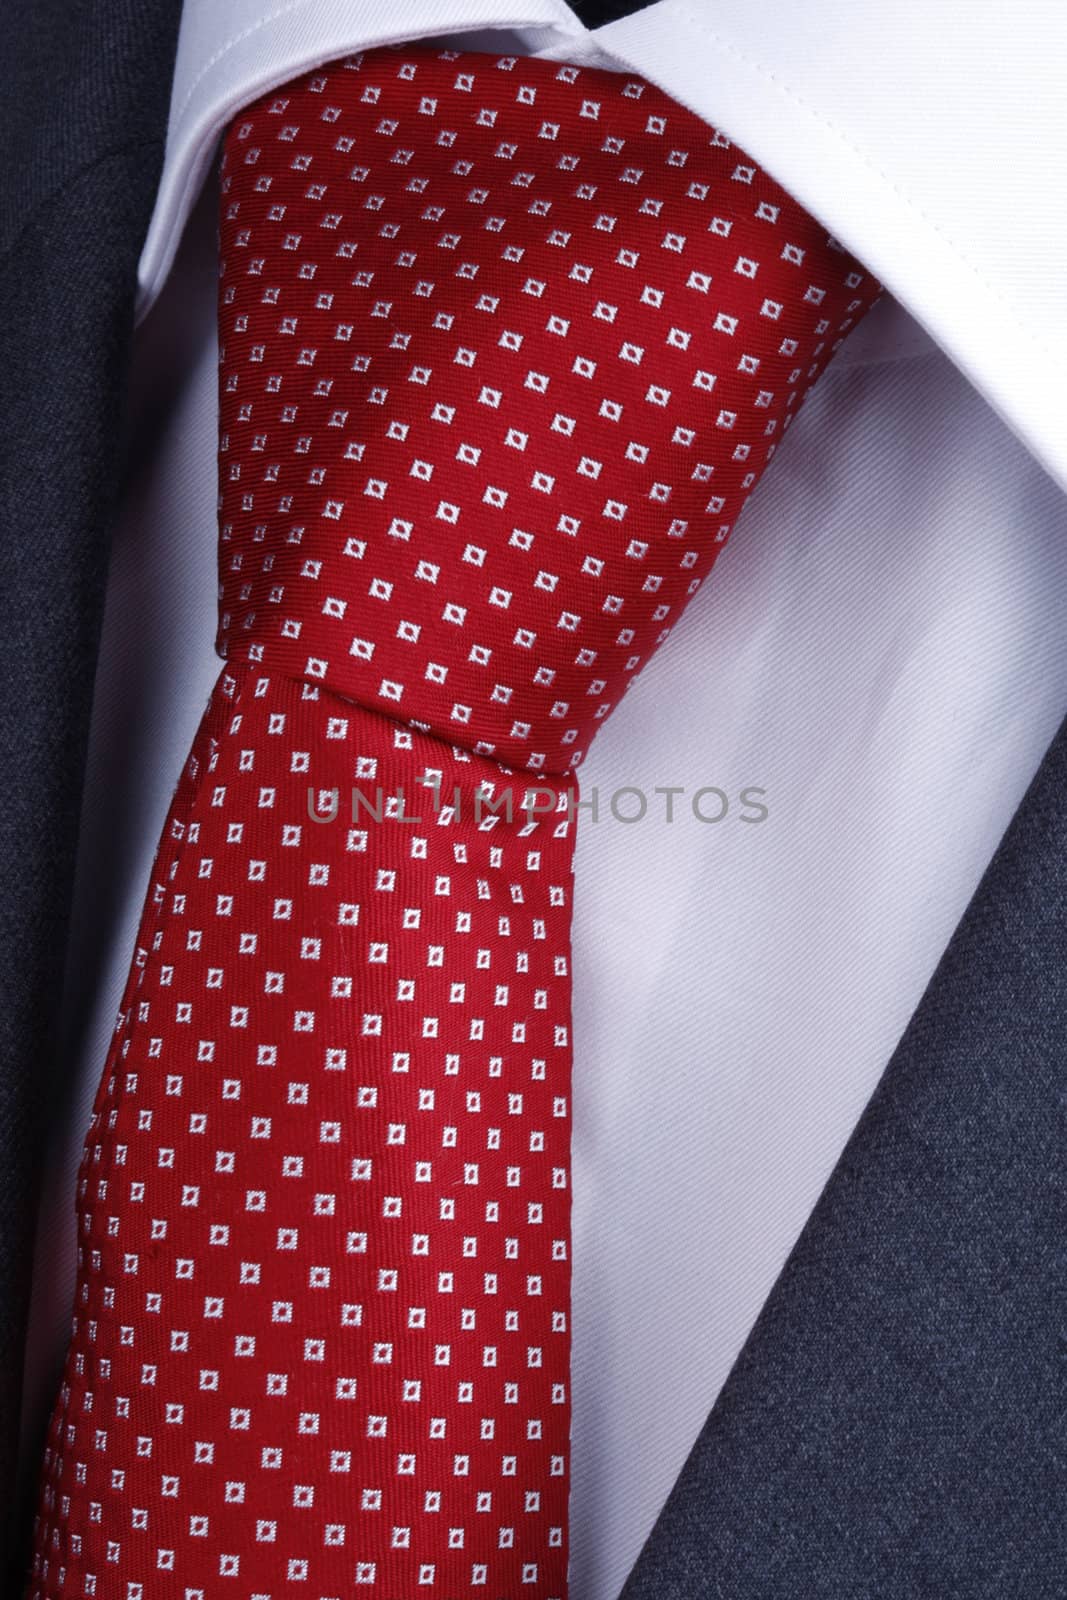 classic red tie on white shirt and gray suit - concept for businessman